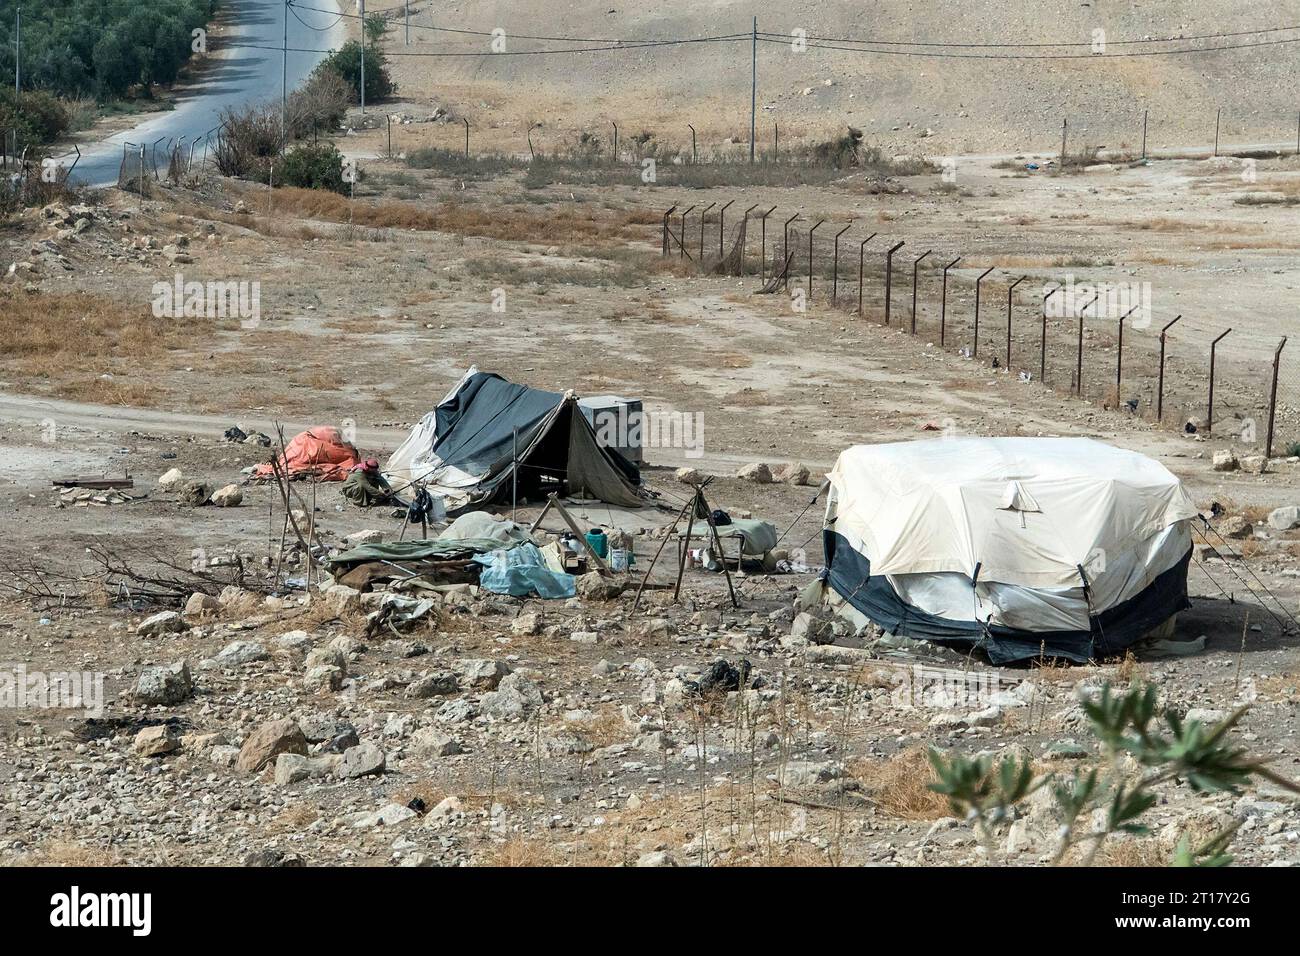 Bedouin houses in the desert near Dead Sea. Poor regions of the world. A indigent Bedouin sitting at the tent. Poverty in Jordan. middle East Stock Photo